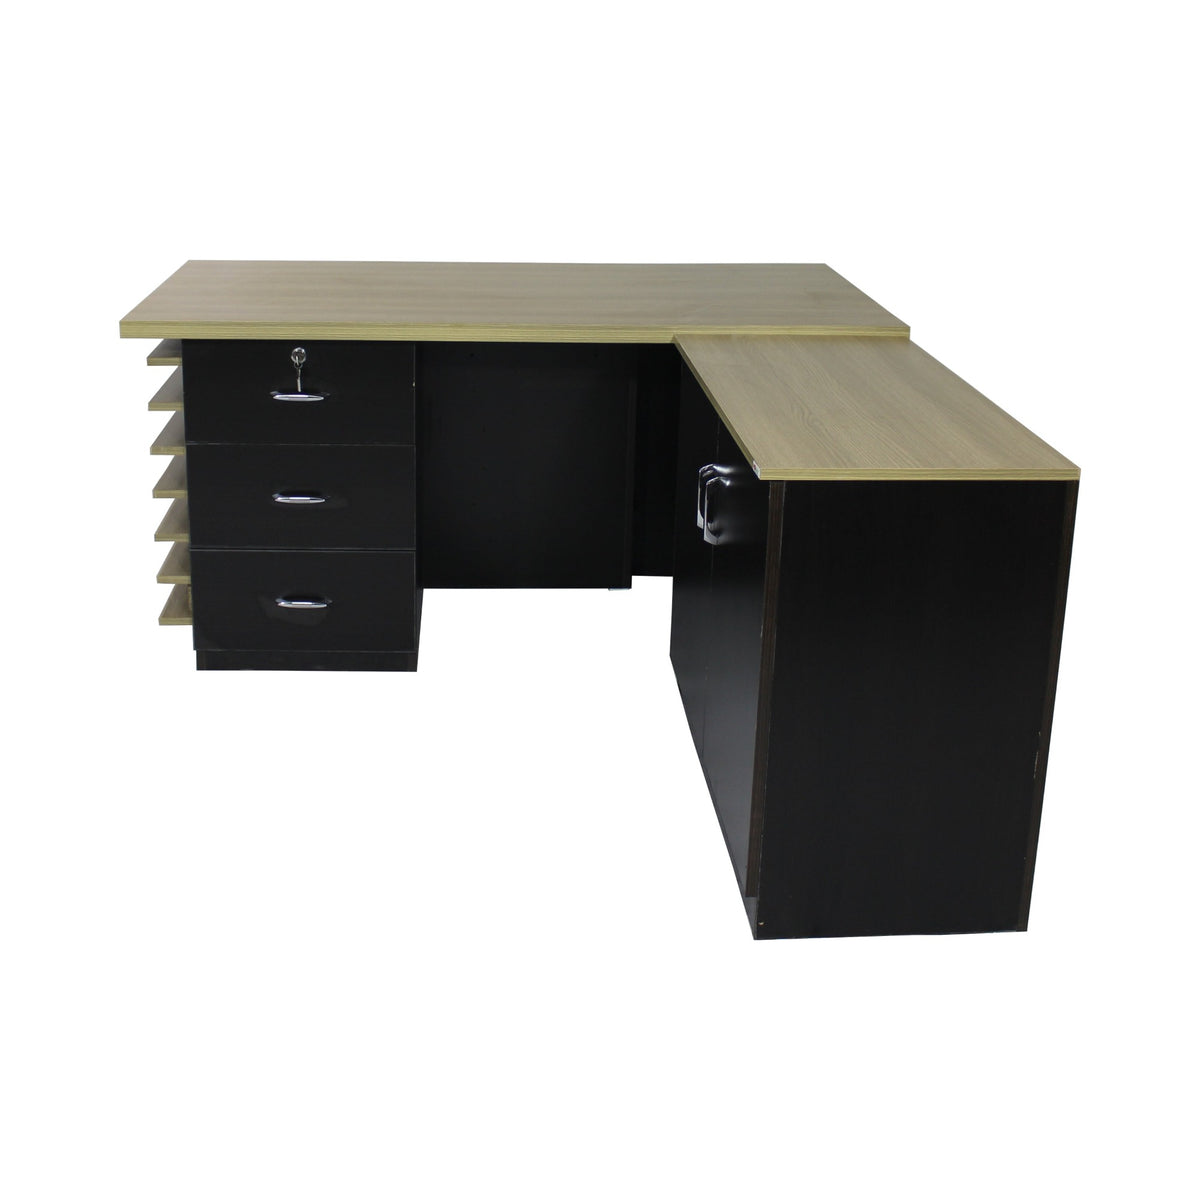 Lexon Engineered Wood Office Table with Drawer and Cabinet